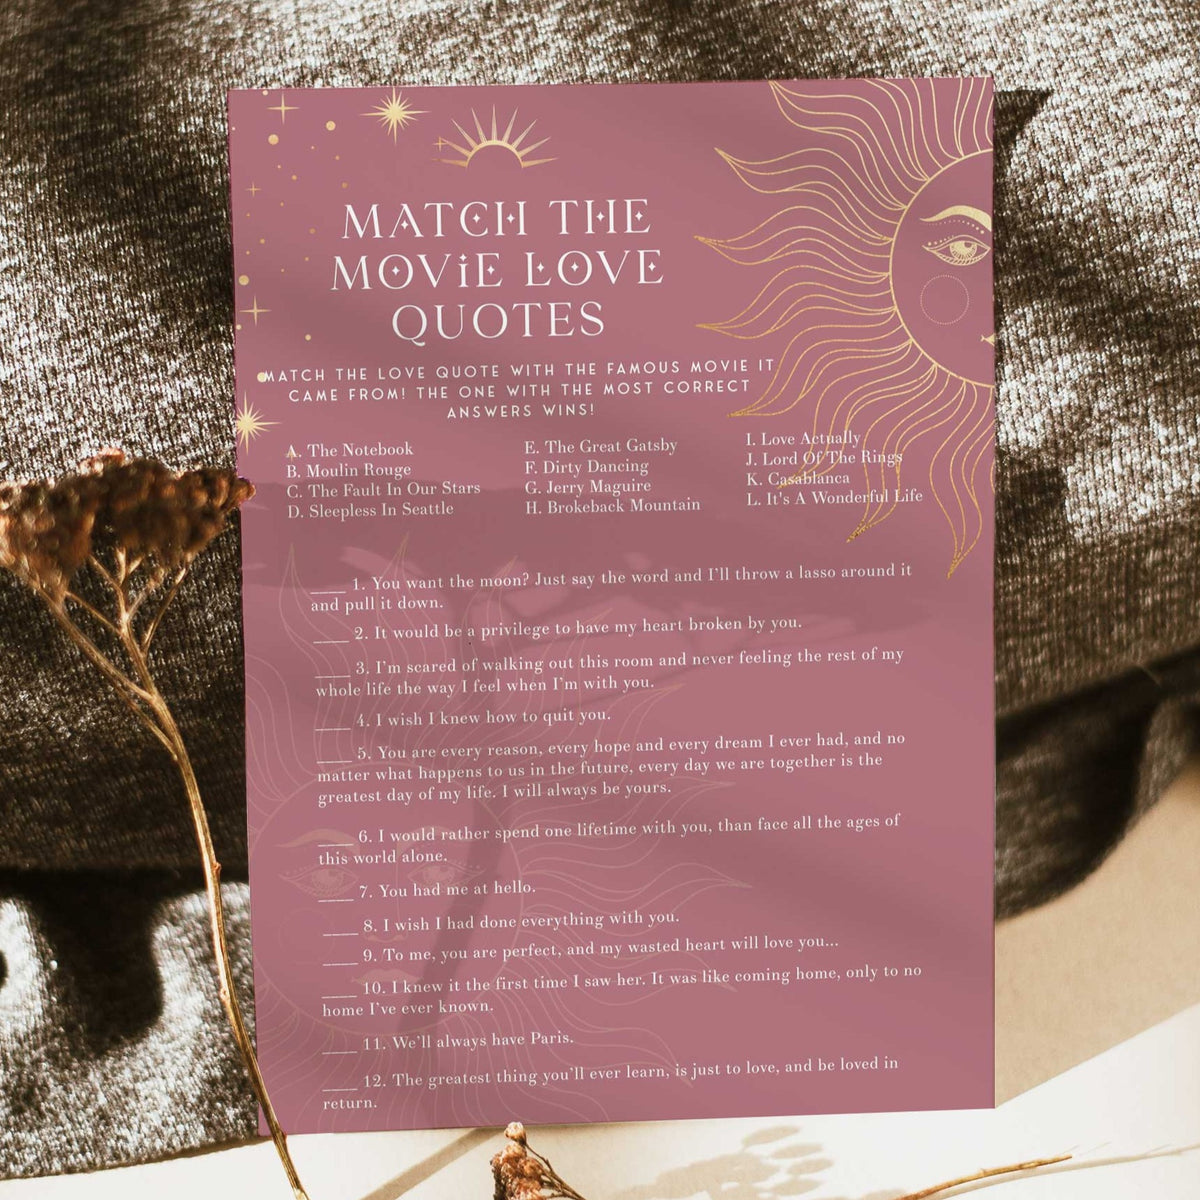 Fully editable and printable bridal shower match the movie love quotes game with a celestial design. Perfect for a celestial bridal shower themed party